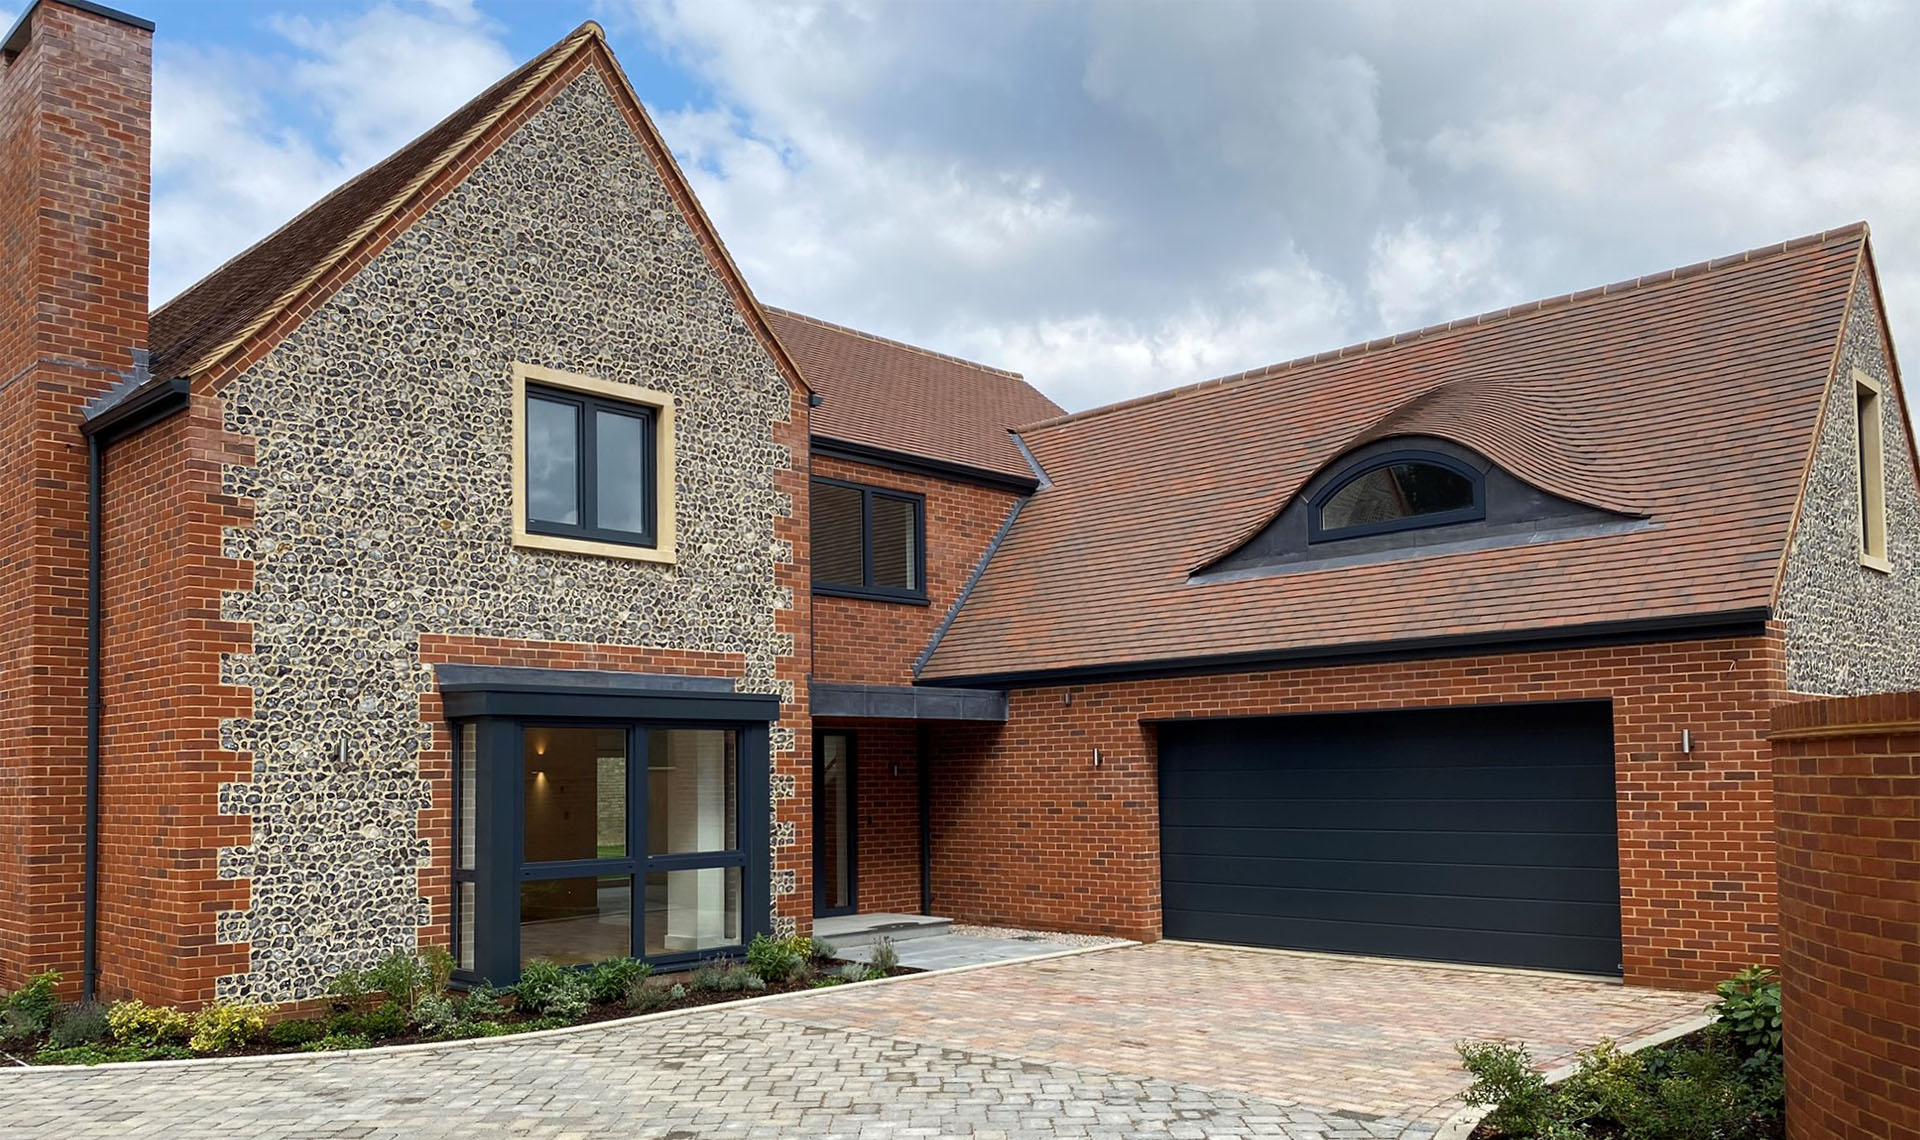 High end development by NP Architects used Dreadnought country brown sanded clay roof tiles